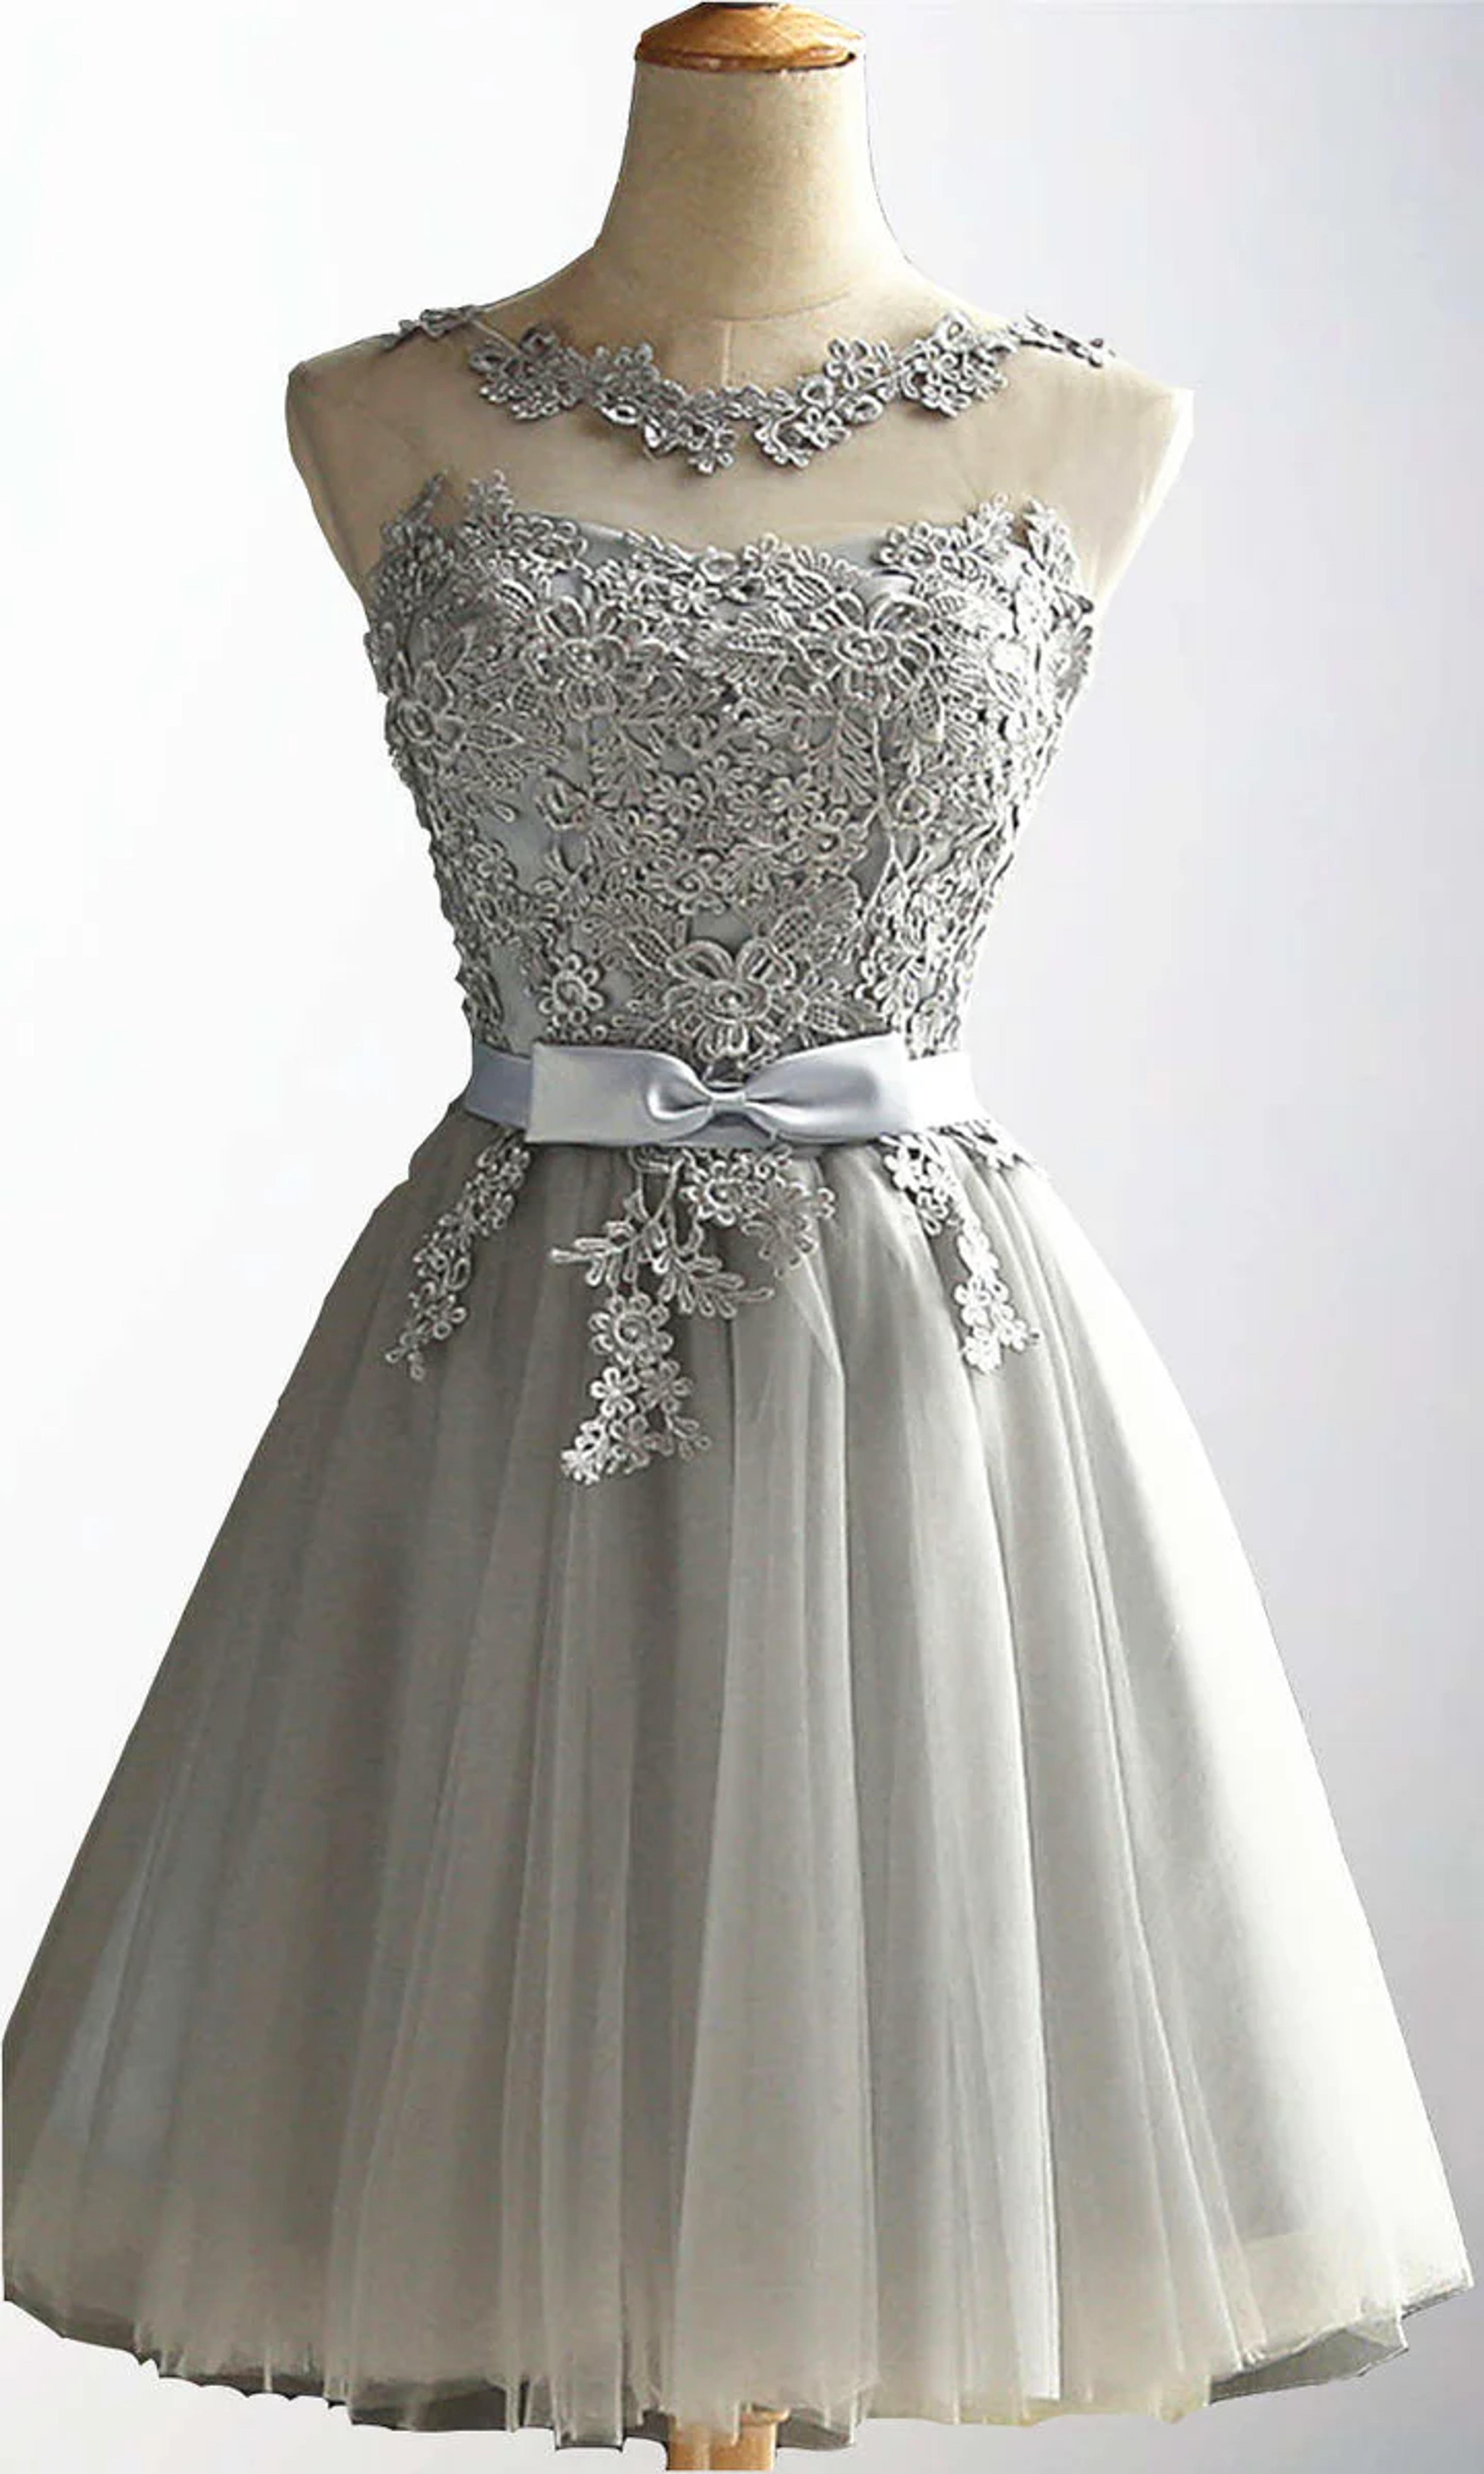 Applique Lace Short Grey Bowknot 8th Grade Prom Dresses with Lace Up B – promboutiqueonline